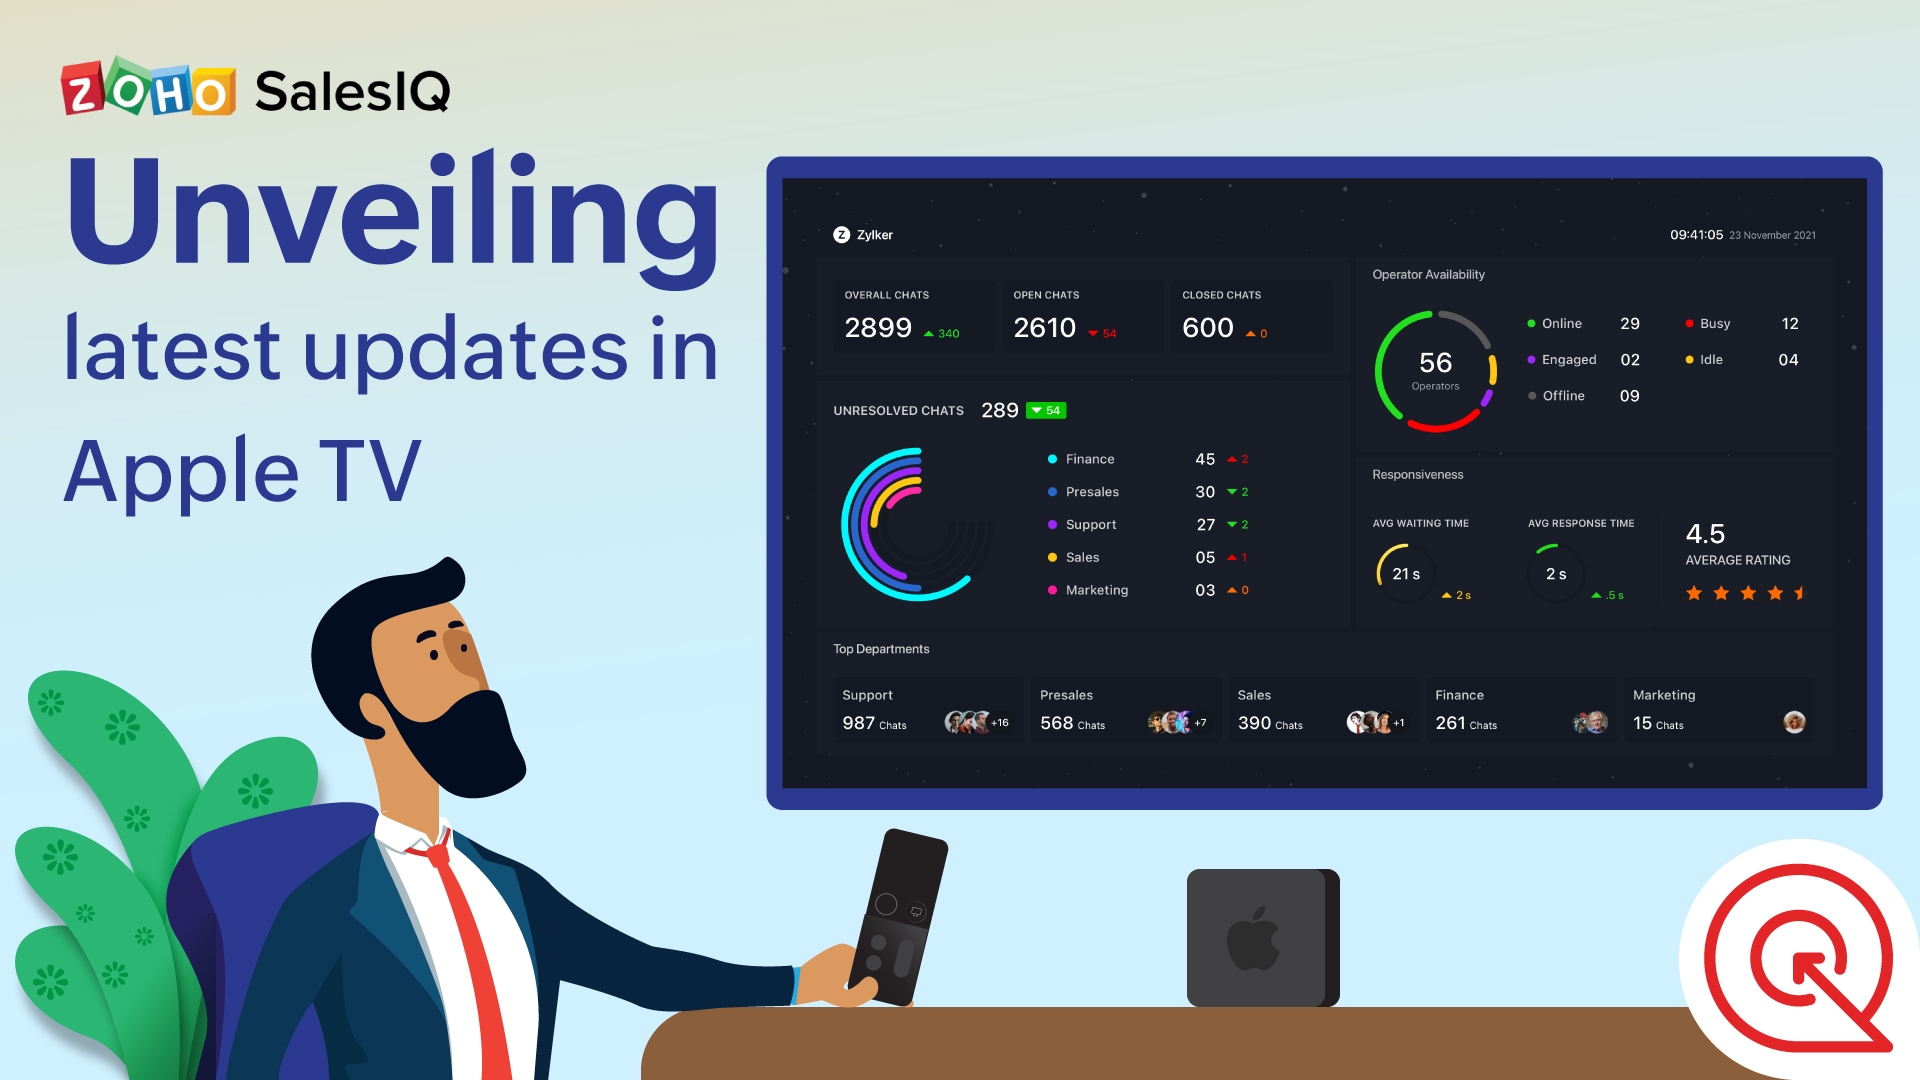 Introducing real-time dashboard for the SalesIQ Apple TV app